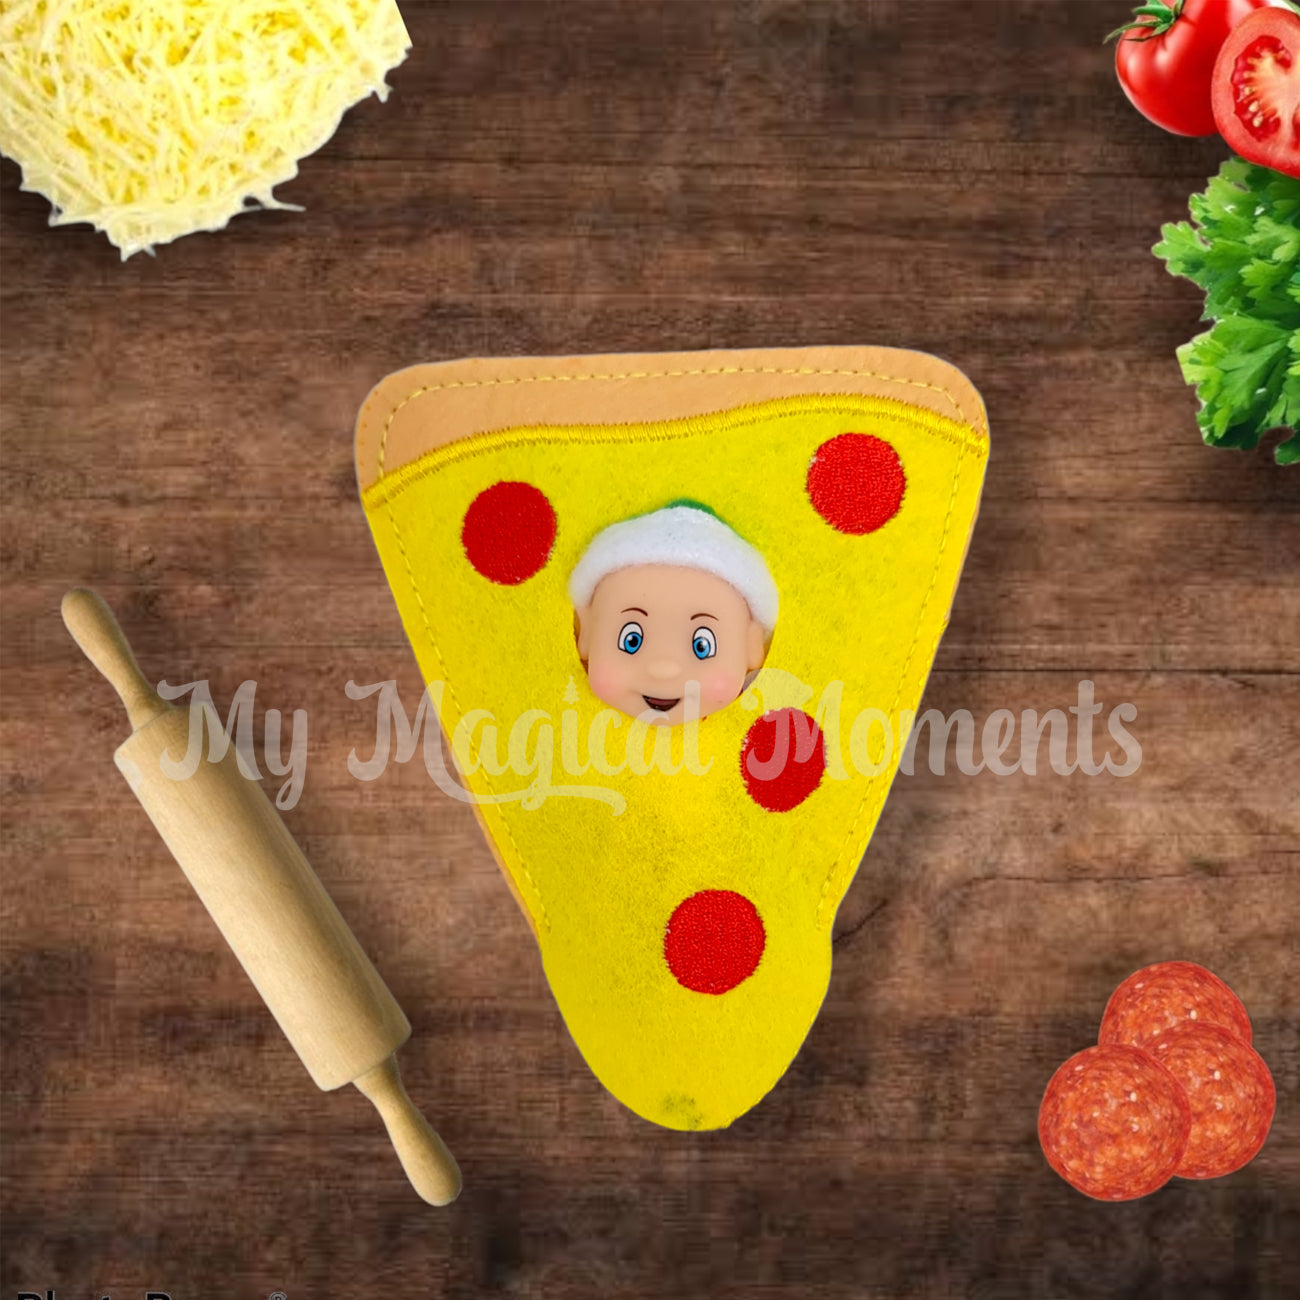 Elf baby dressed as a pepperoni pizza on a chopping board with cheese and a rolling pin